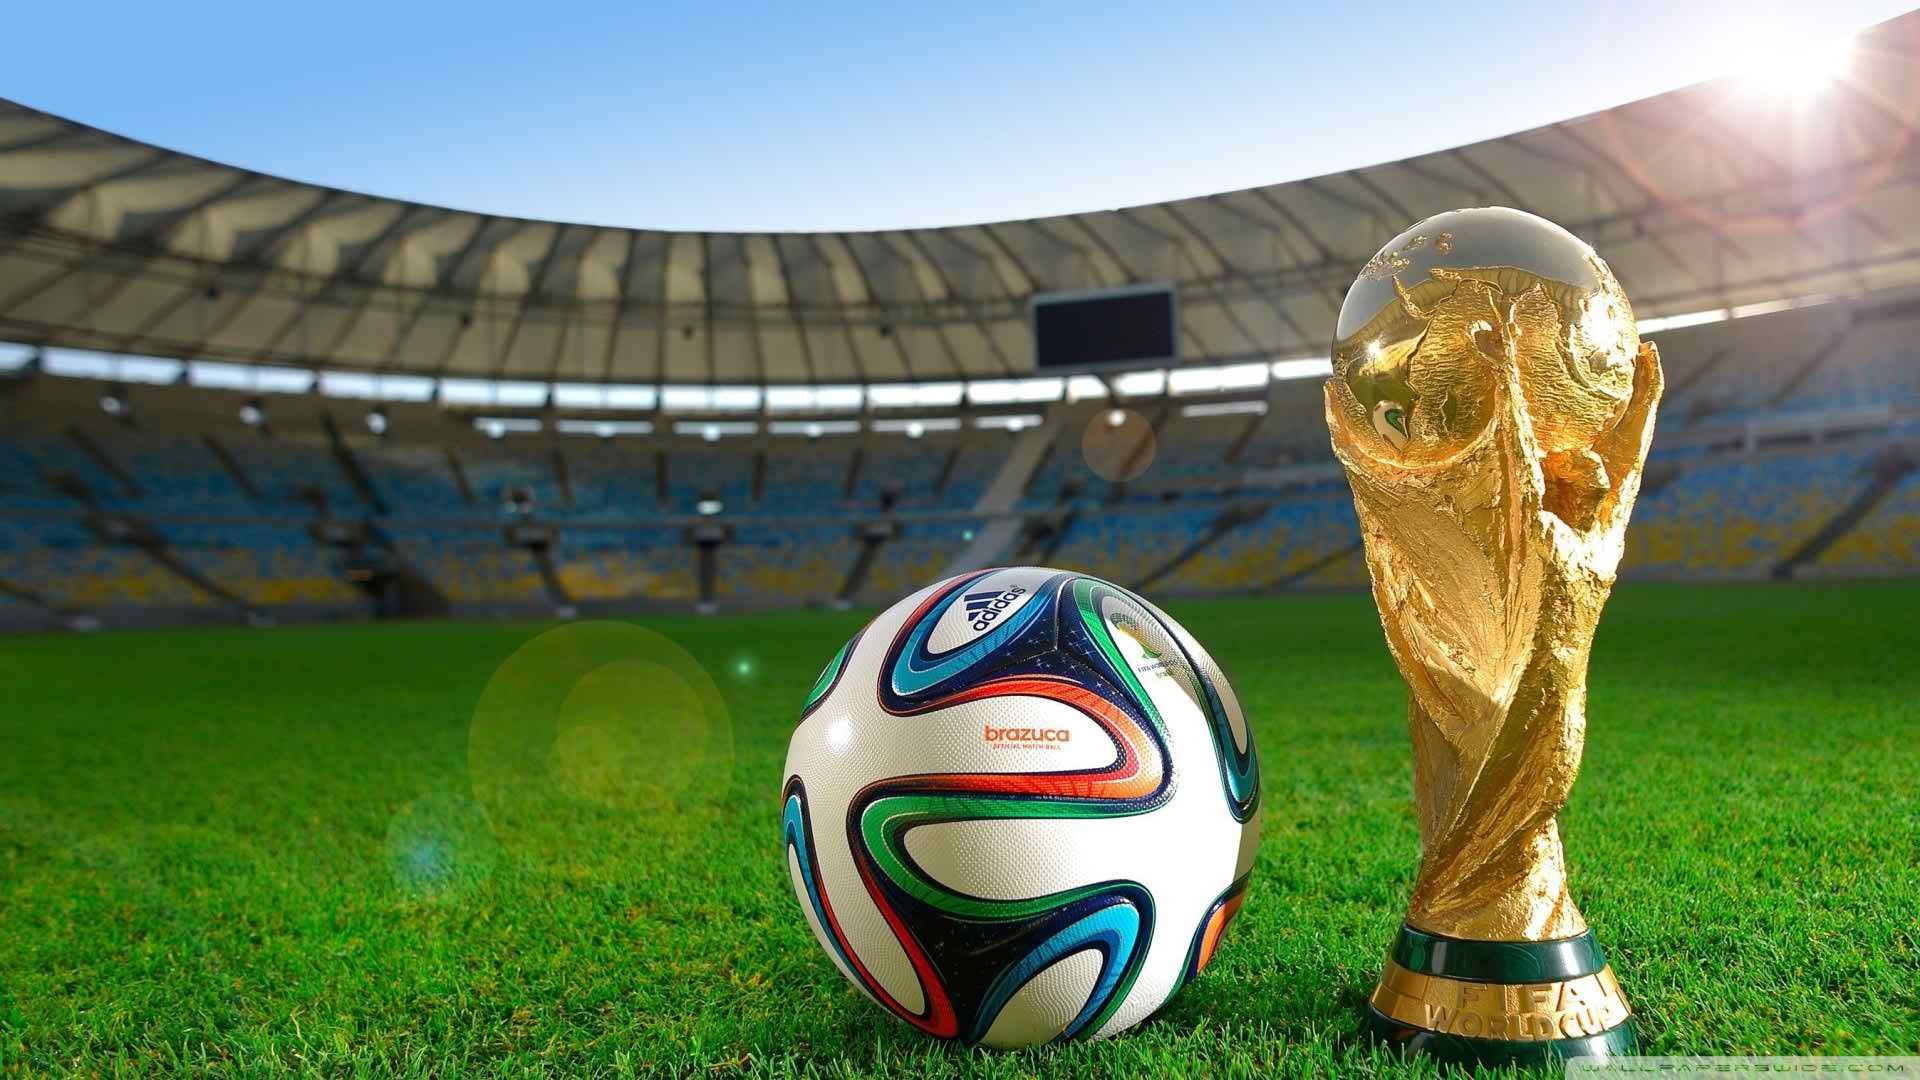 FIFA World Cup HD Wallpaper With Resolution 1920X1080